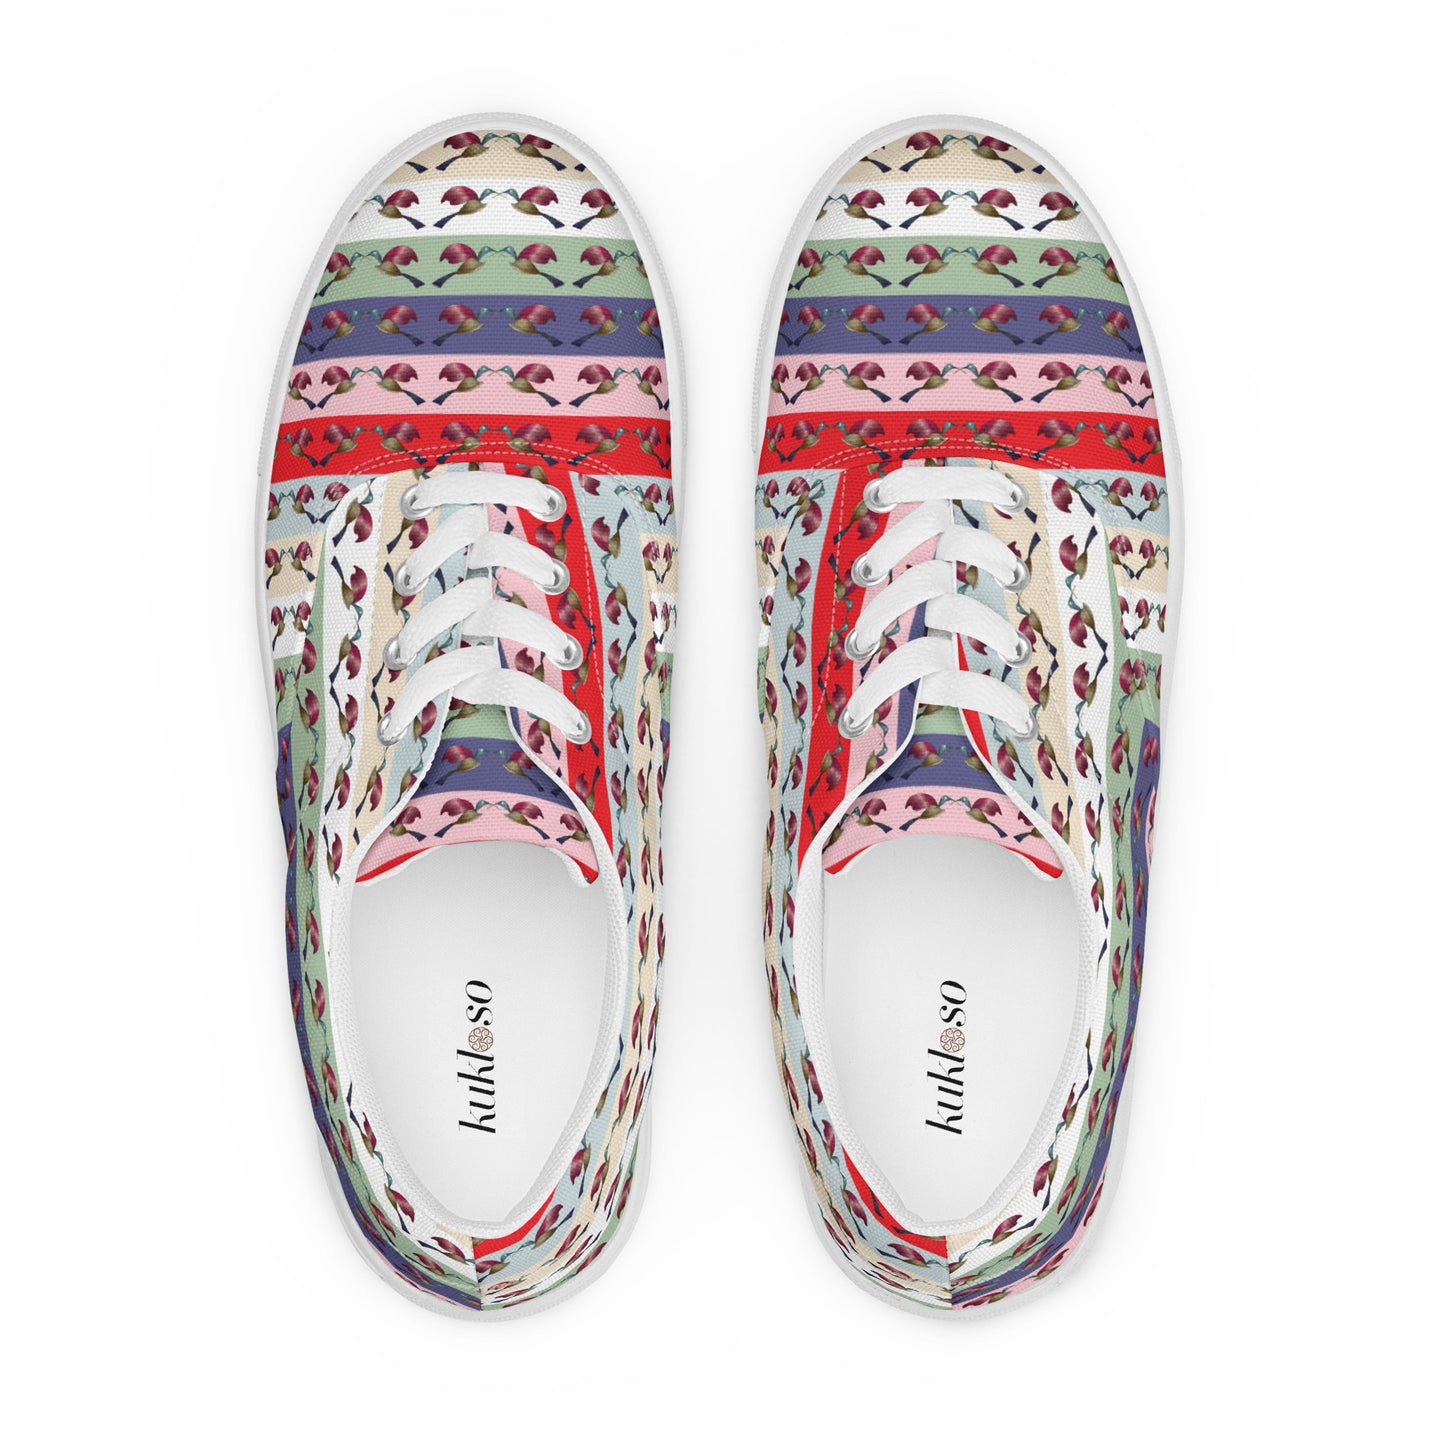 Women’s lace-up canvas shoes Kukloso FS Multicolor Hummingbirds - Free Shipping